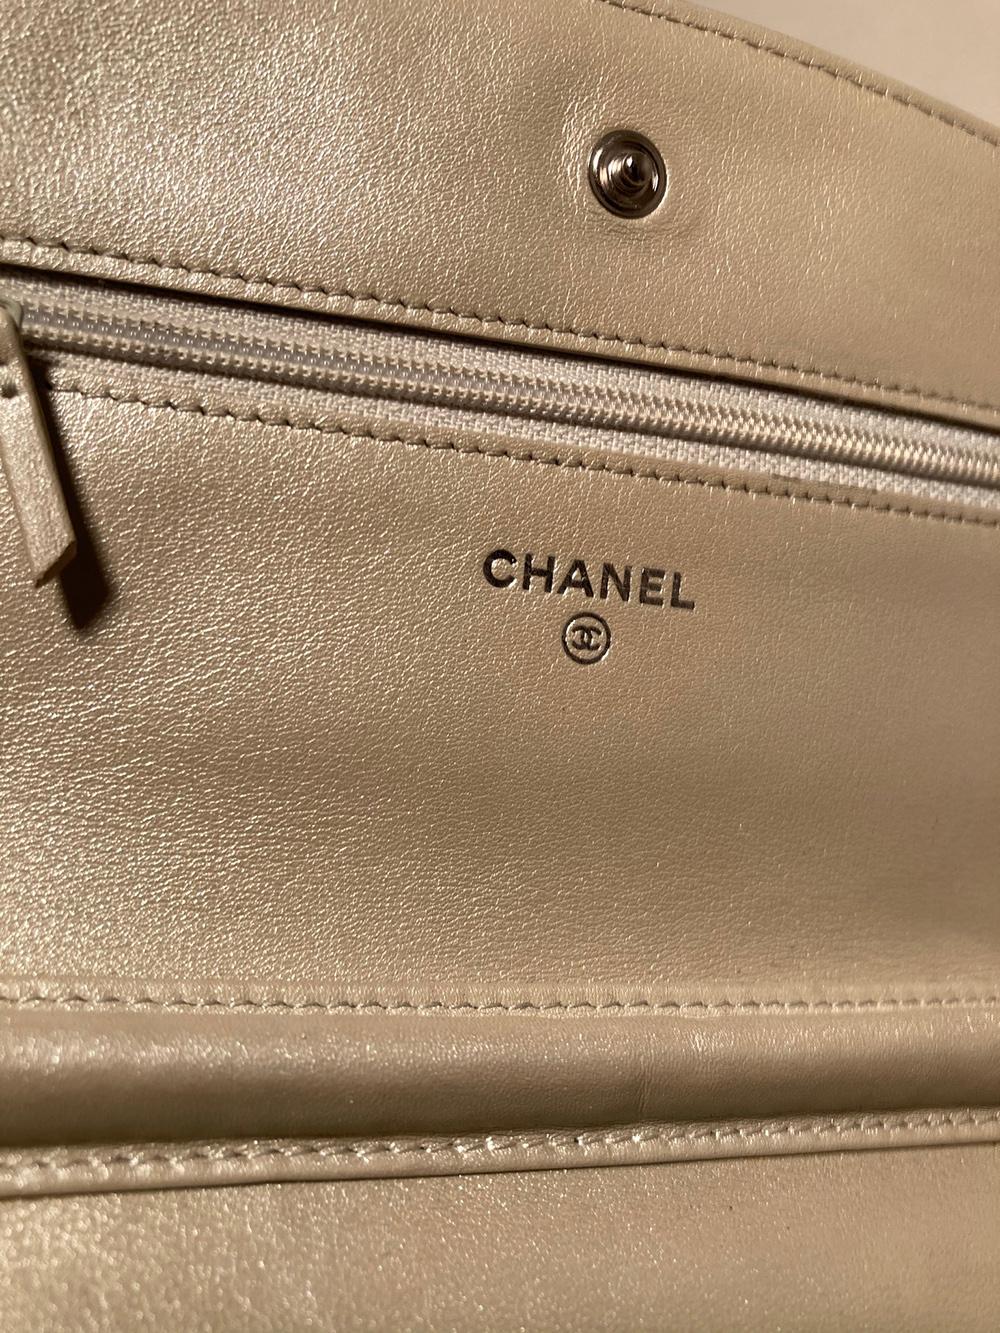 Chanel Pearl Caviar Leather WOC Wallet on a Chain 3